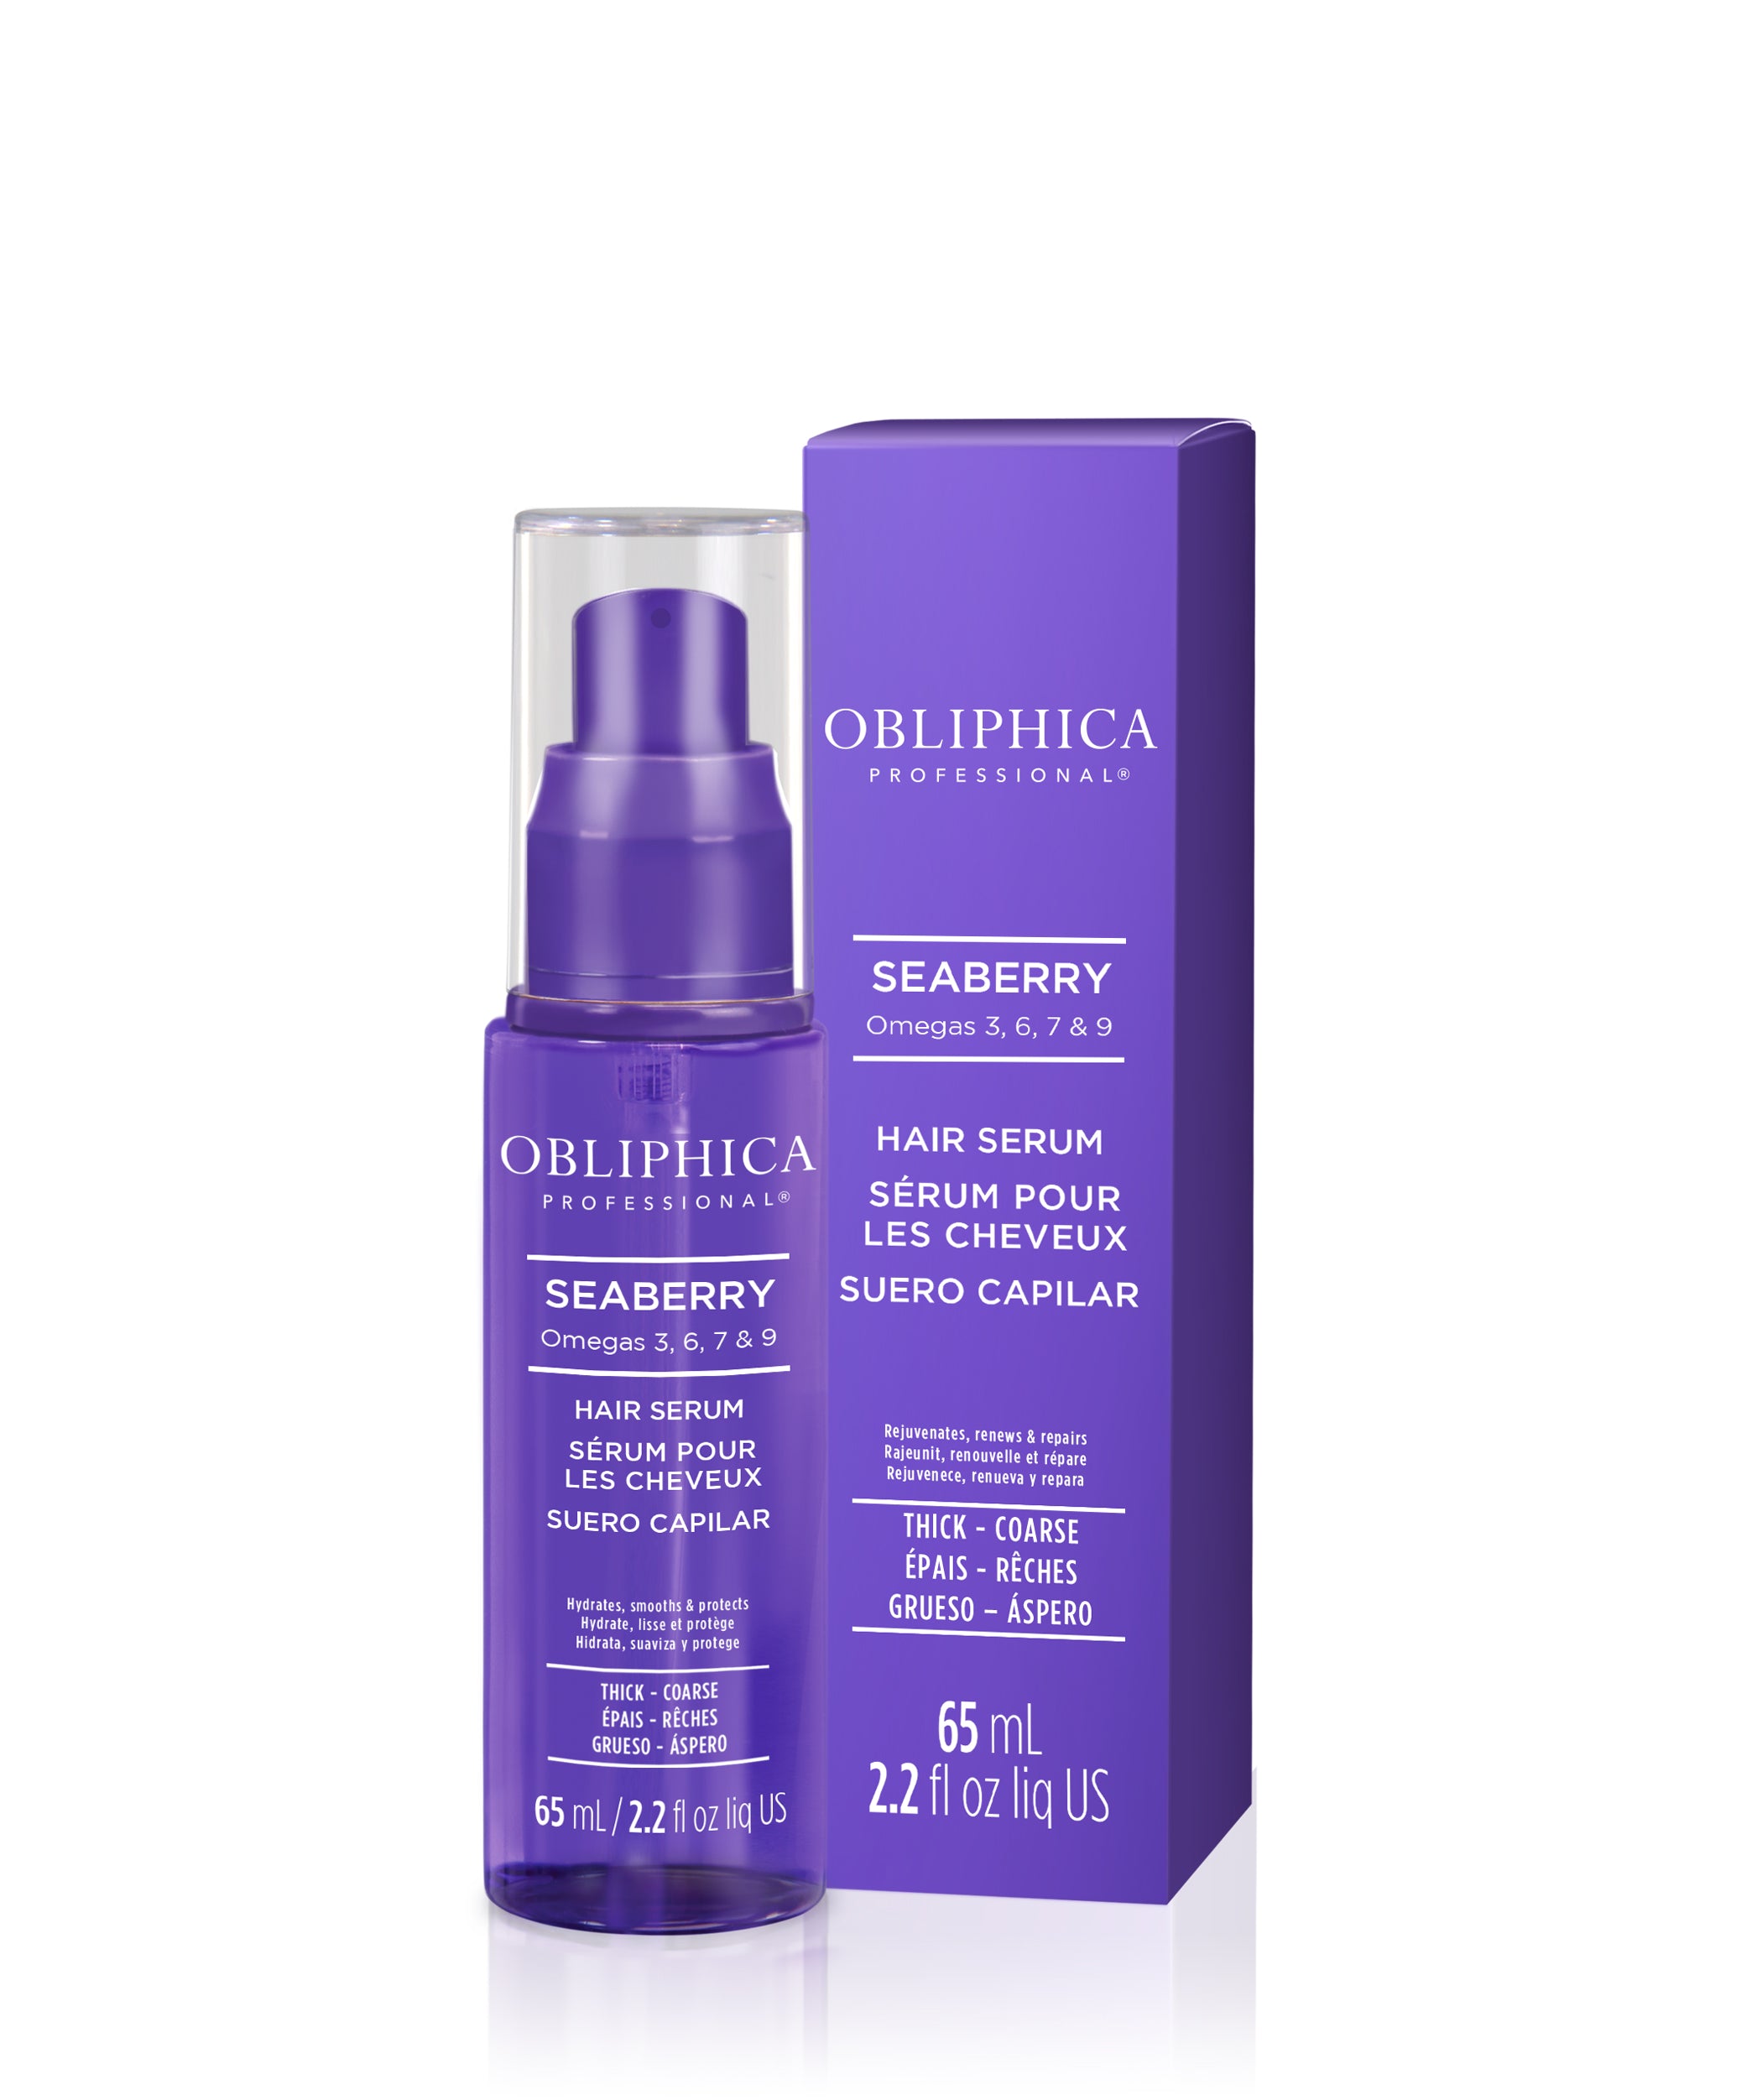 Obliphica Professional Seaberry Hair Serum